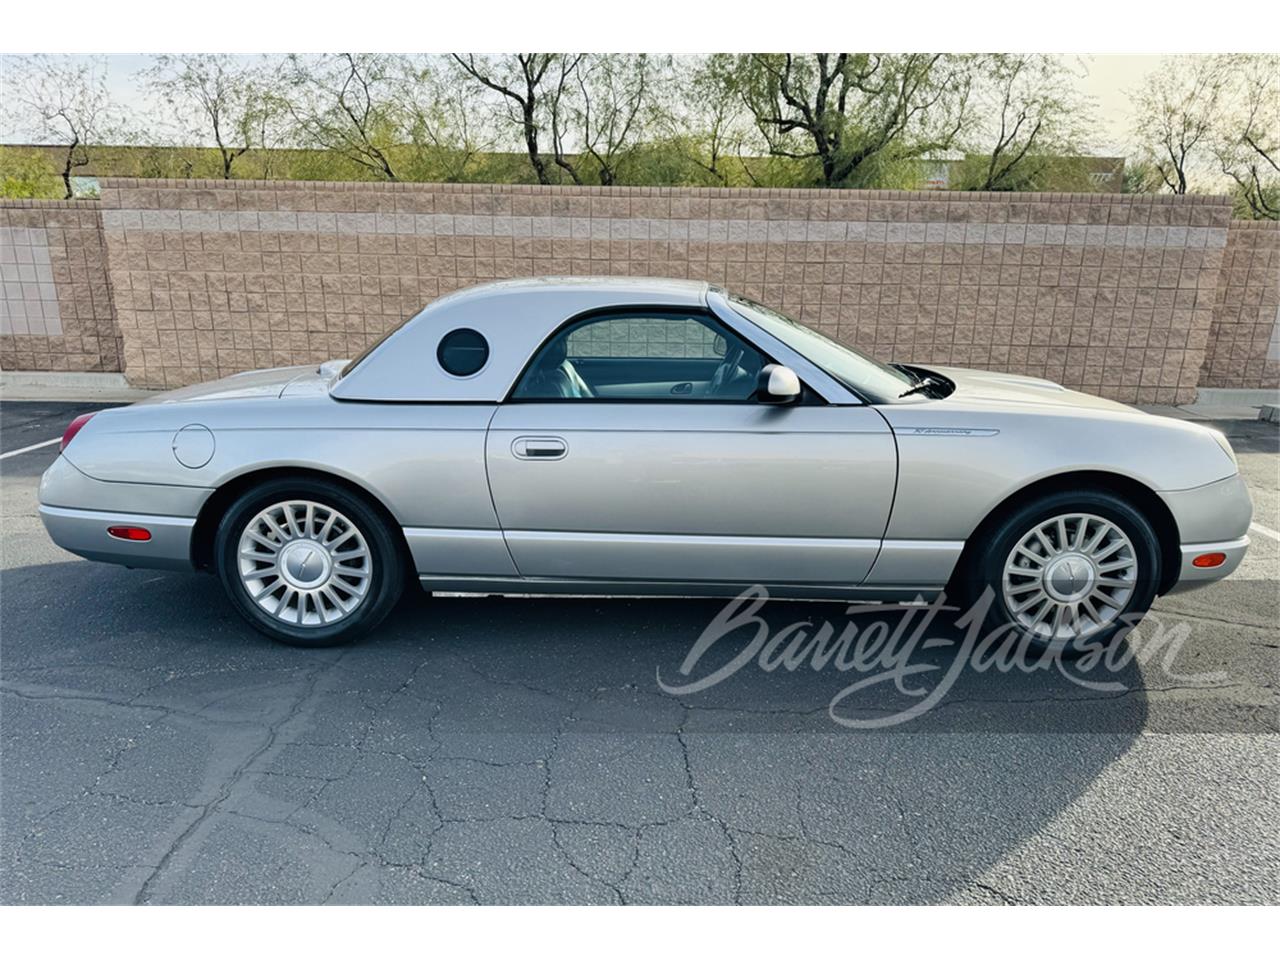 For Sale at Auction: 2005 Ford Thunderbird in Scottsdale, Arizona for sale in Scottsdale, AZ